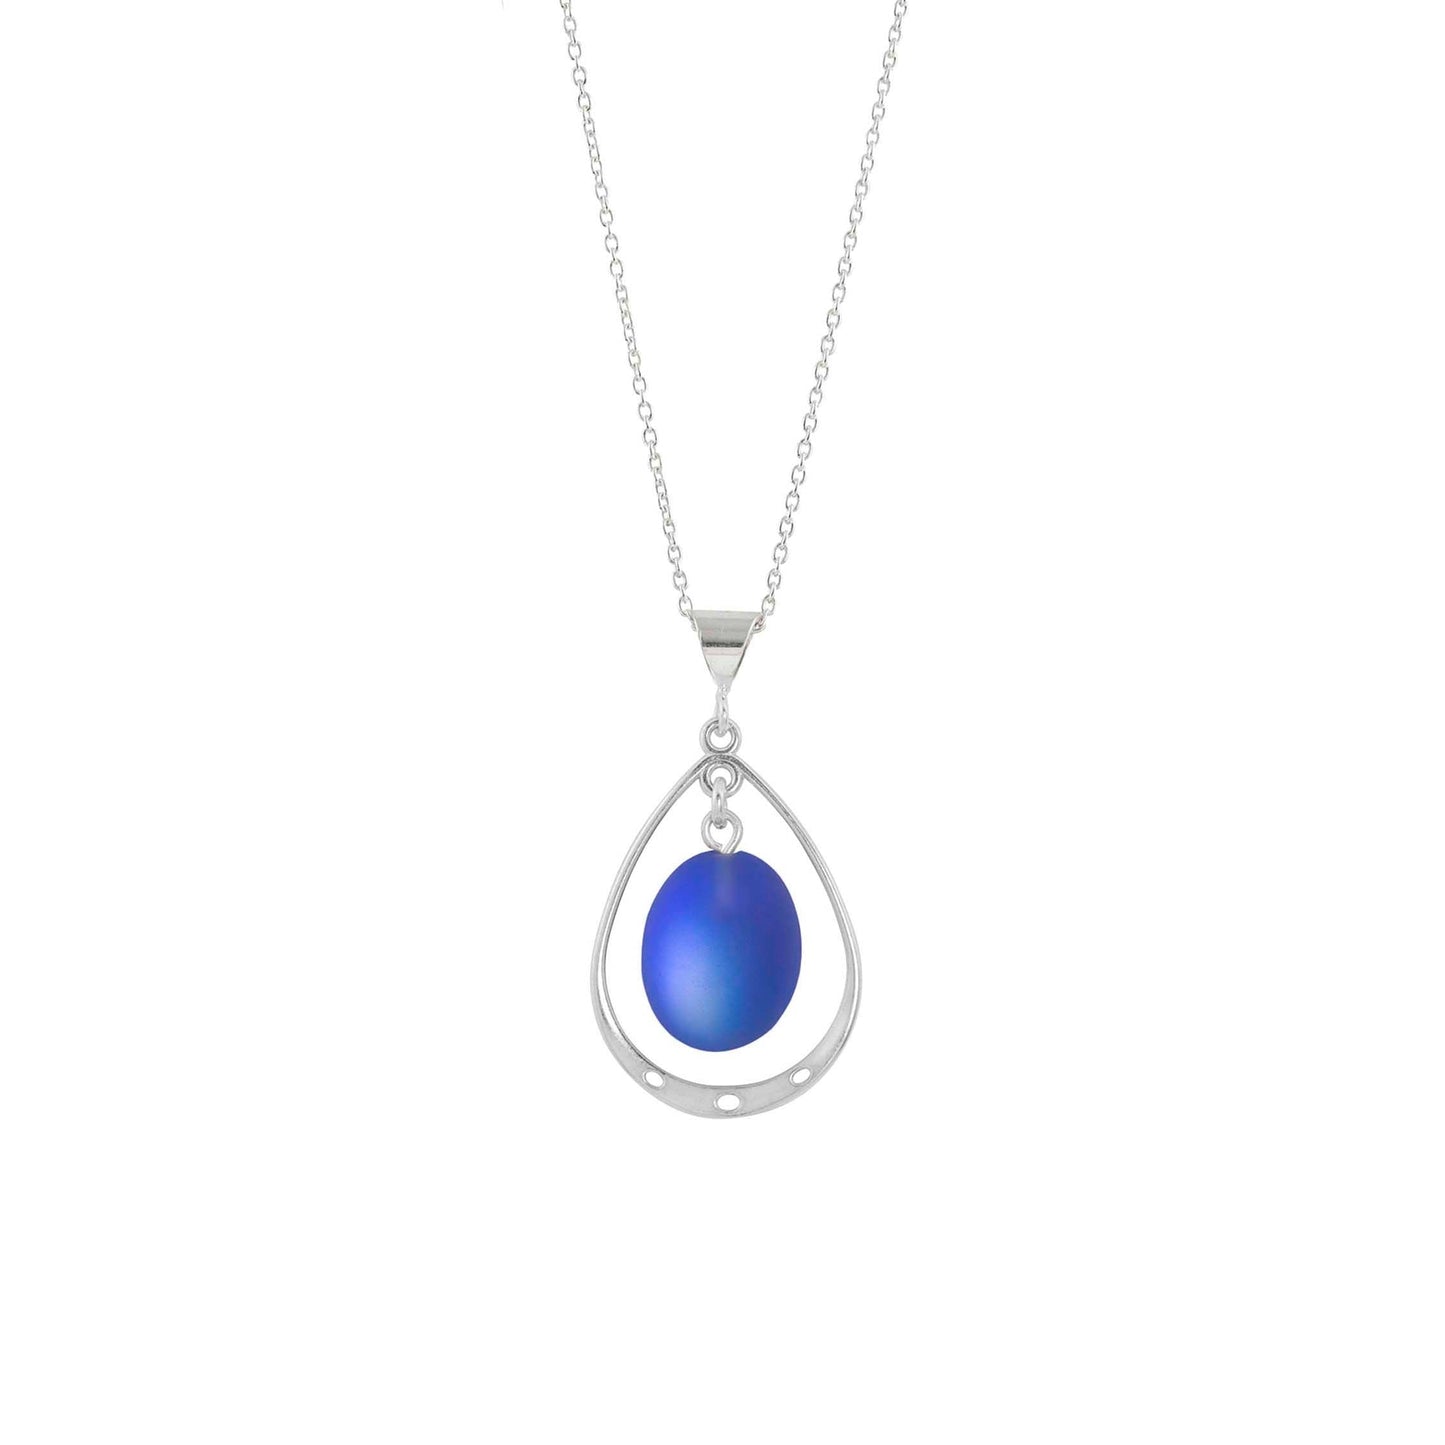 Oval Crystal with Sterling Silver Loop Pendant - Blue